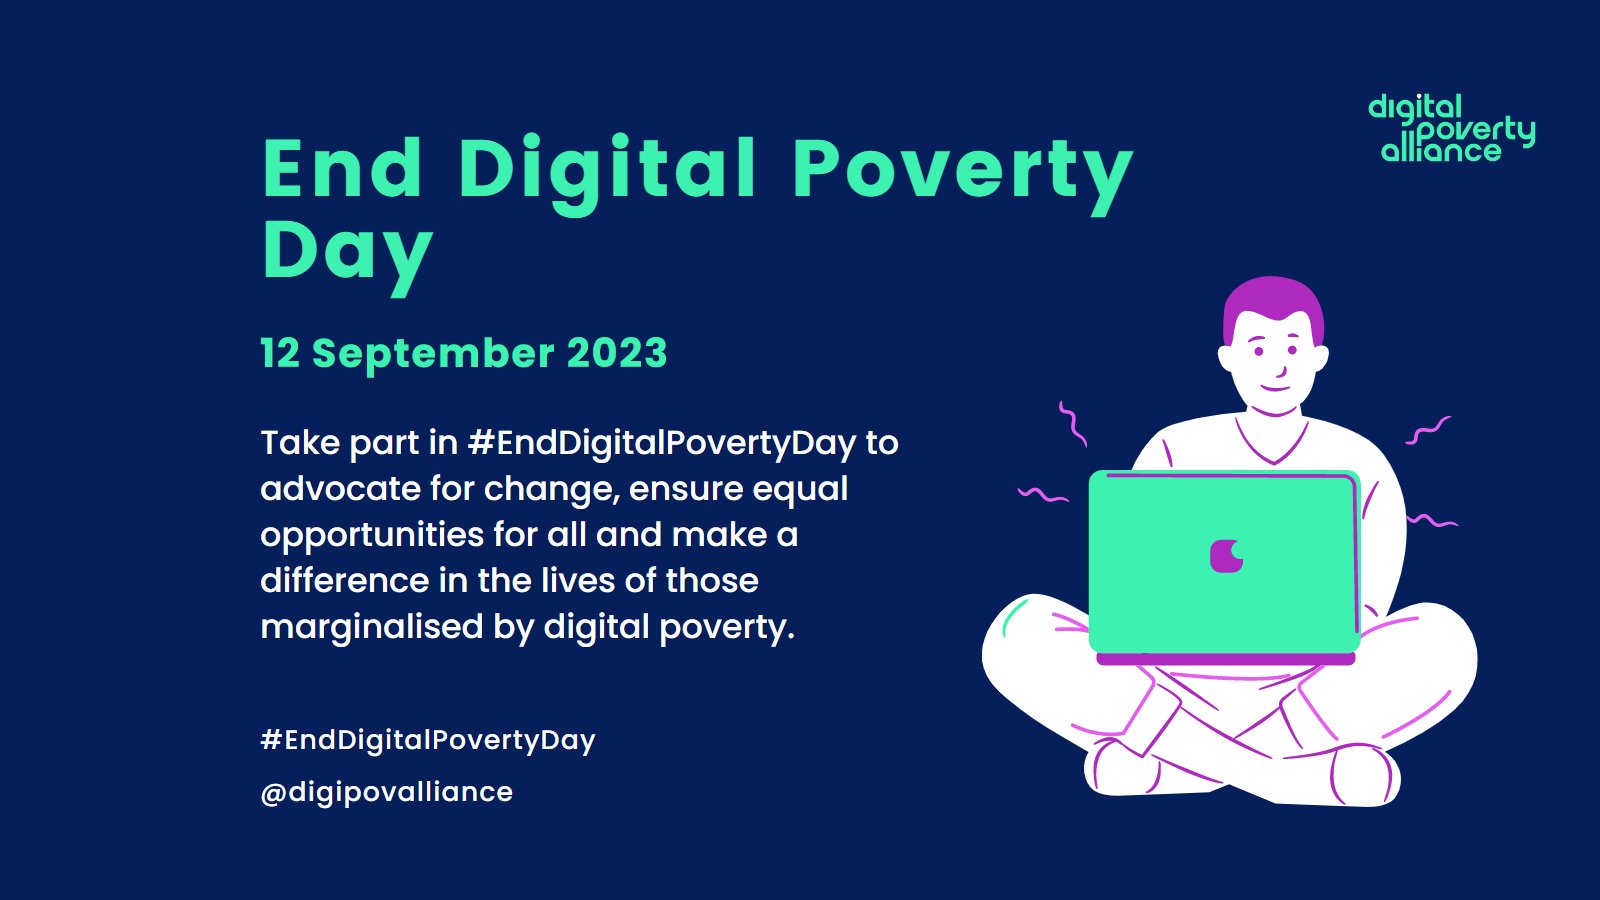 LEPs join the battle to end digital poverty